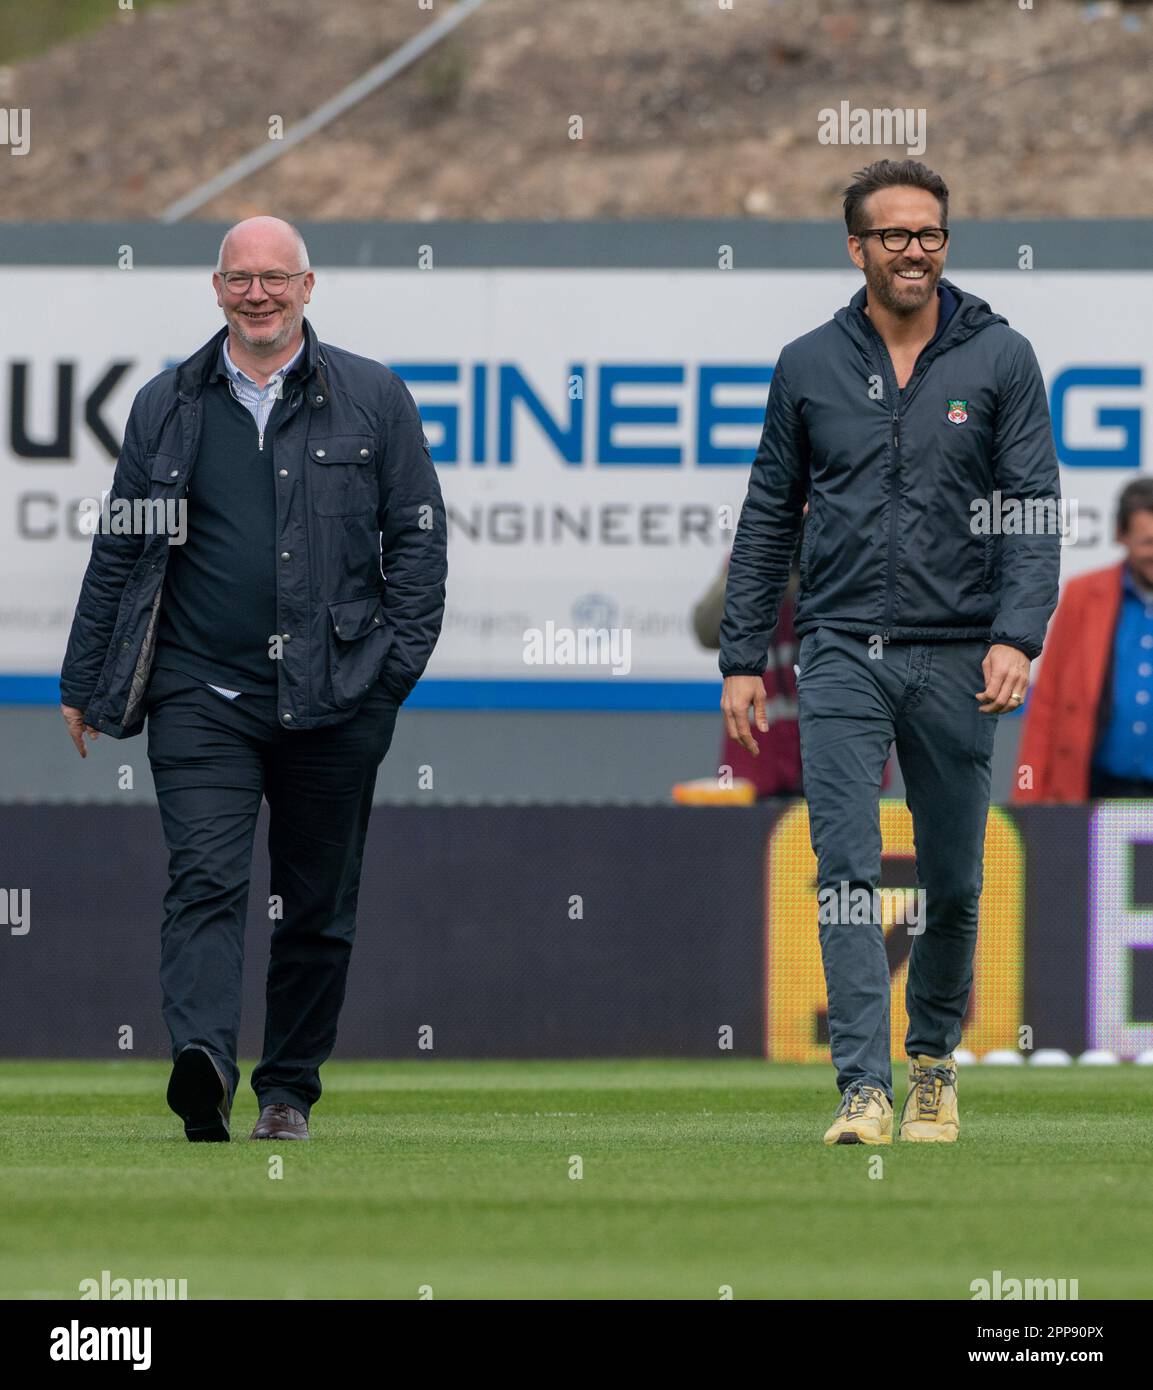 wrexham-wrexham-county-borough-wales-22nd-april-2023-co-owner-ryan-reynolds-and-shaun-harvey-walks-across-the-pitch-ahead-of-kick-off-during-wrexham-association-football-club-v-boreham-wood-football-club-at-the-racecourse-ground-in-in-the-vanarama-national-league-credit-image-cody-froggattalamy-live-news-2PP90PX.jpg